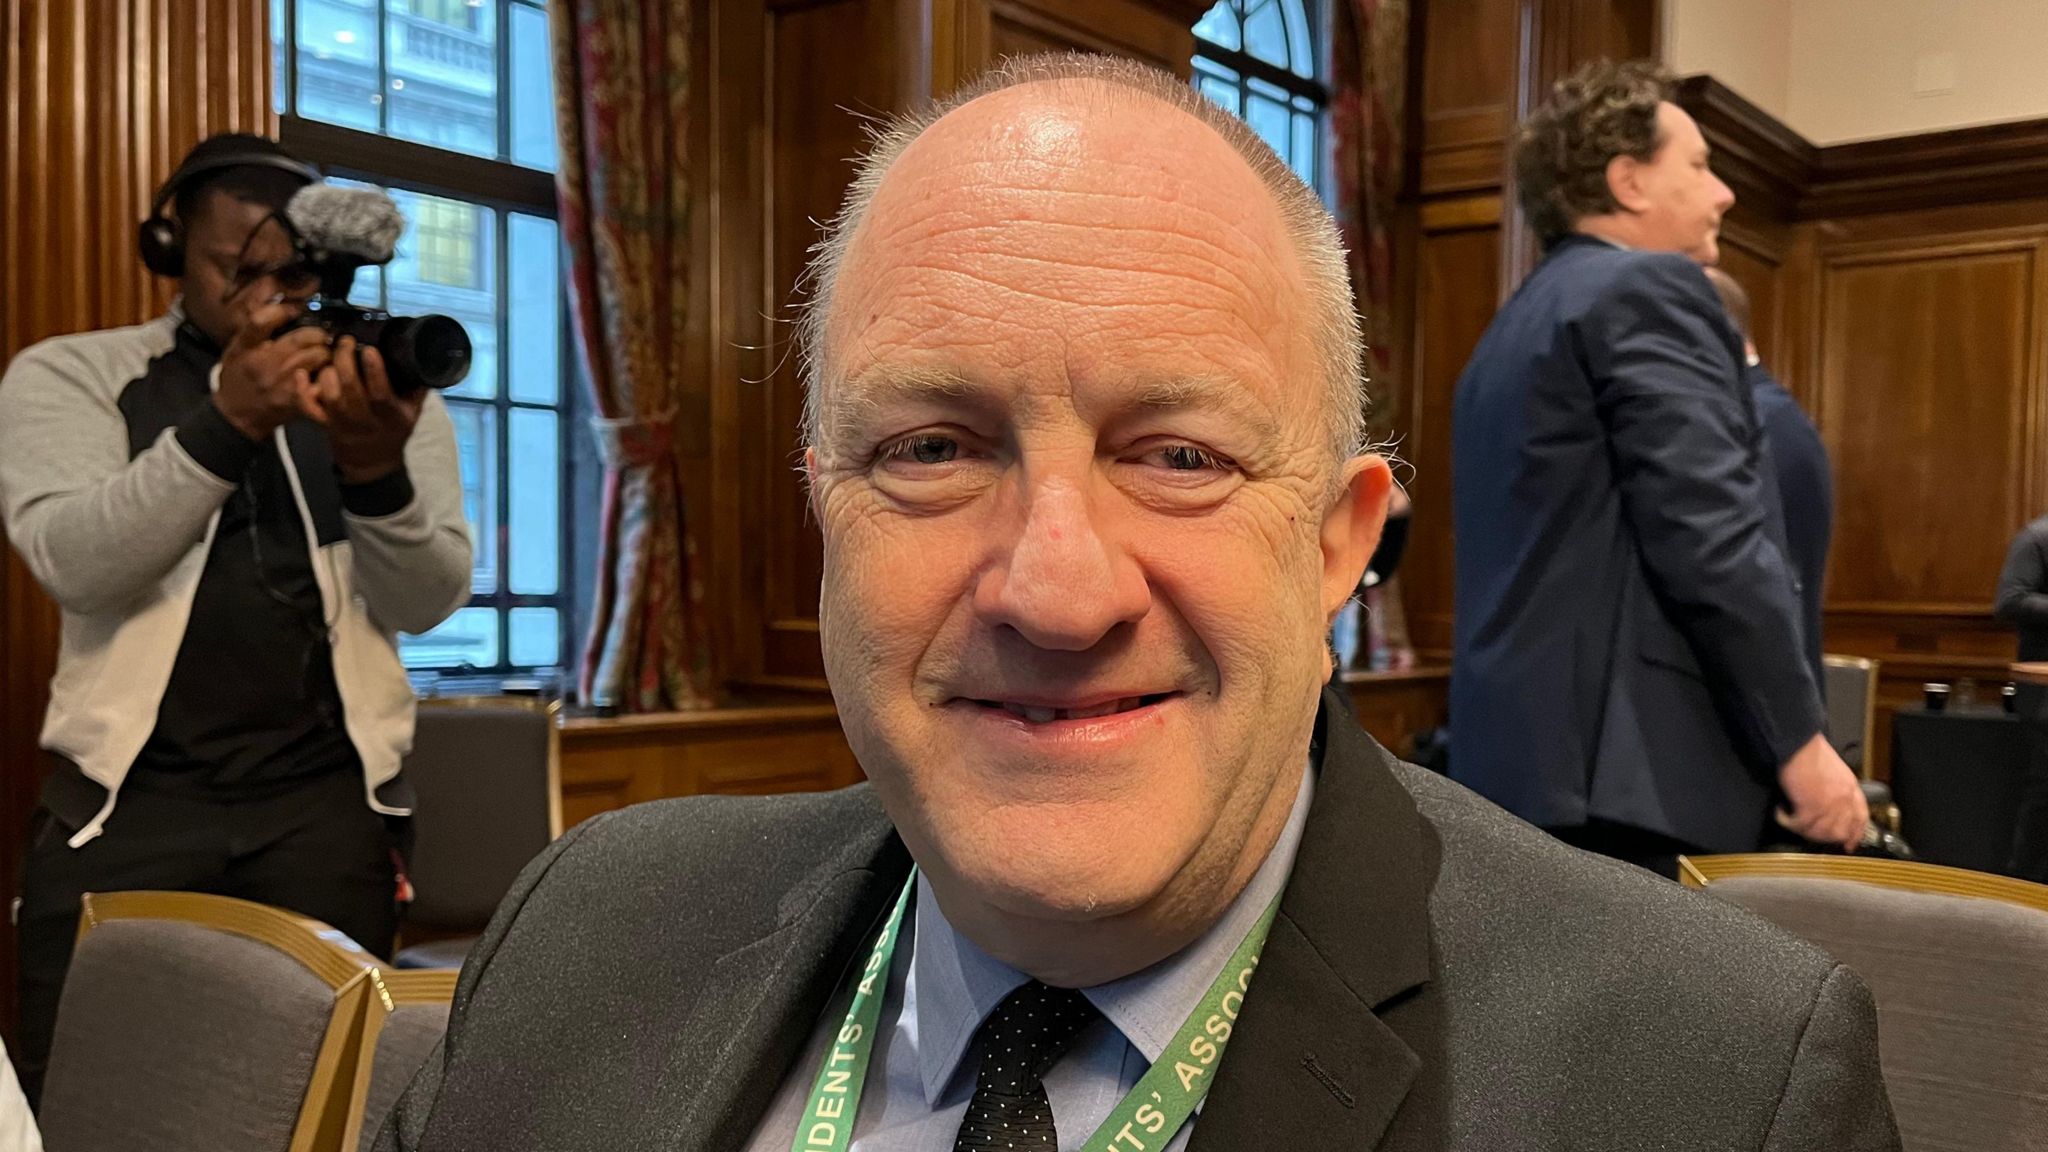 Councillor Ray Morgon, leader of the London Borough of Havering